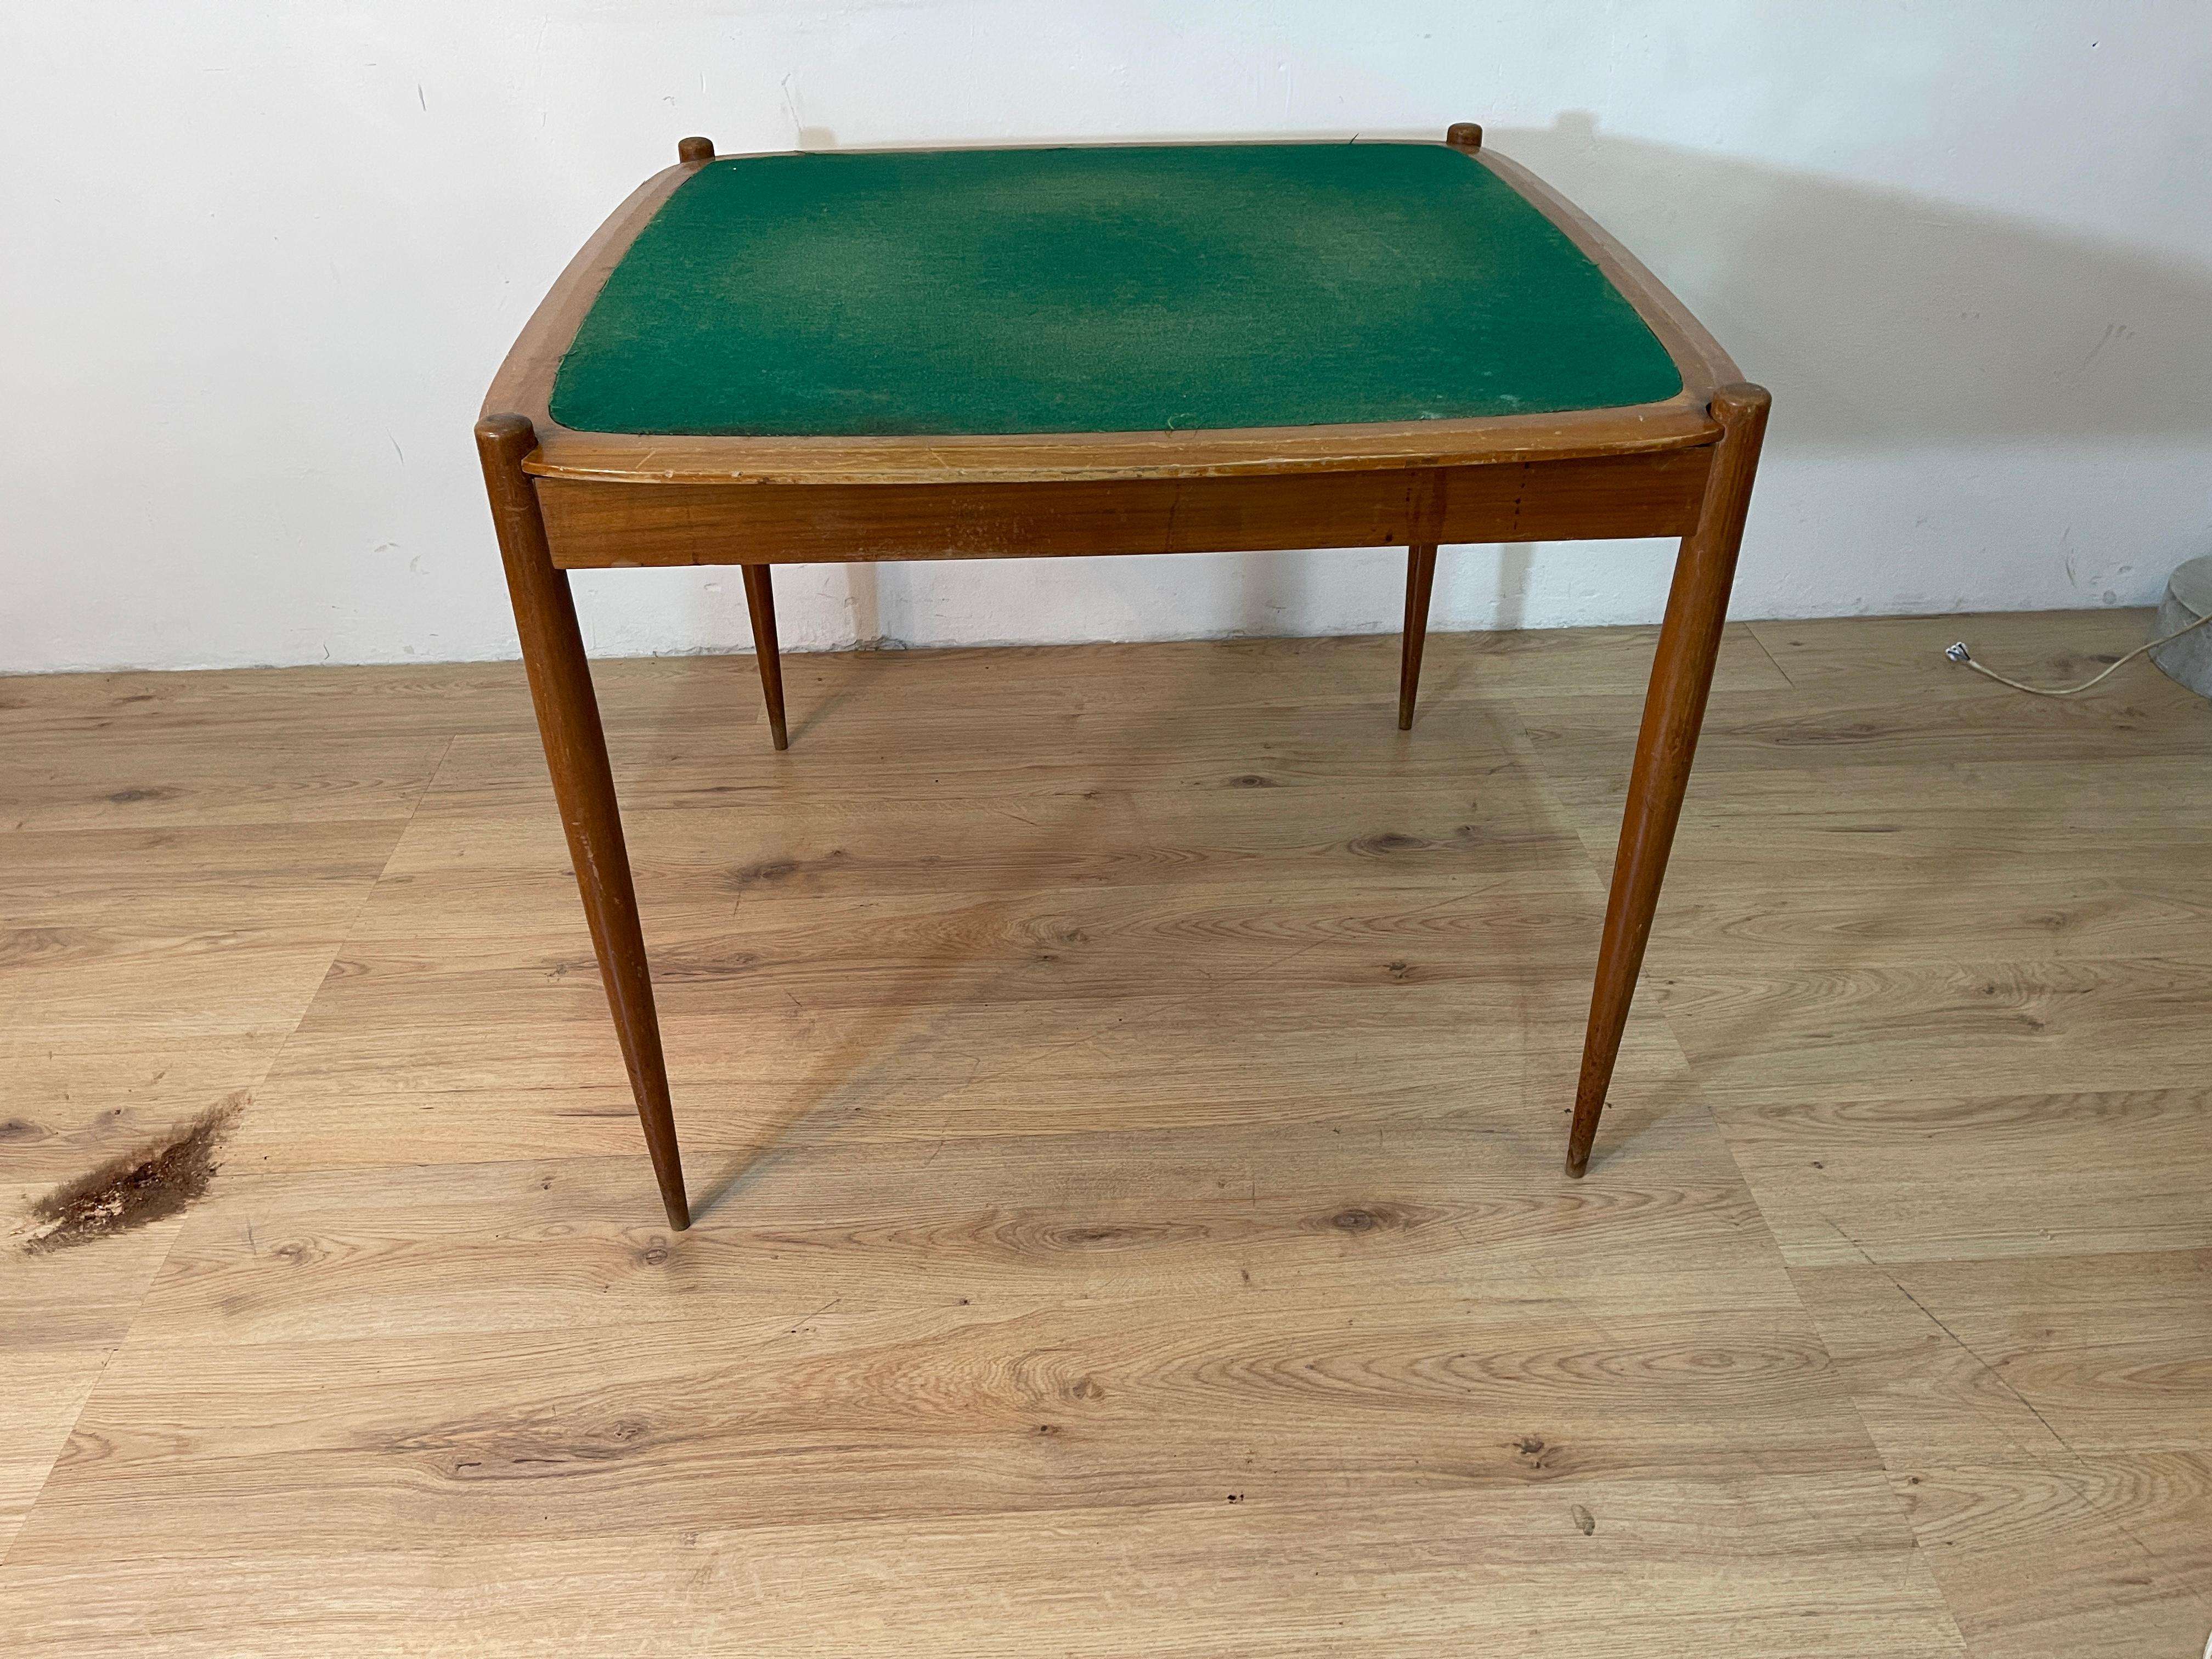 Game table with reversible top, one side with the green cloth for the game and a part with wood finish to be a normal dining room table. The Table is a famous work of the greatest Italian designer, Giò Ponti who designed it for the equally famous